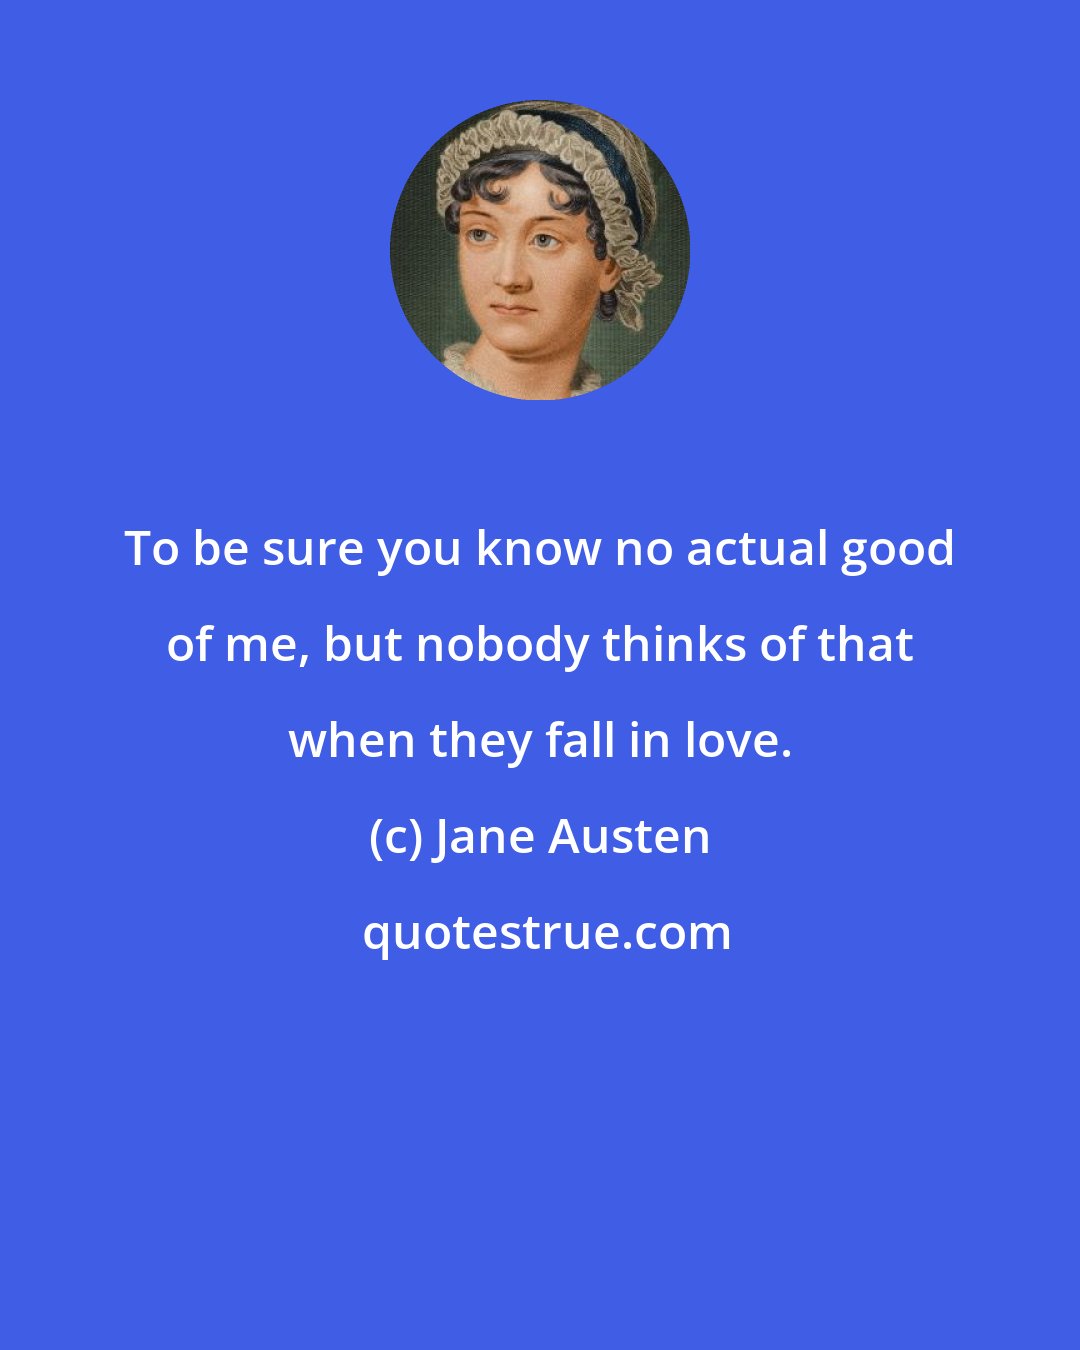 Jane Austen: To be sure you know no actual good of me, but nobody thinks of that when they fall in love.